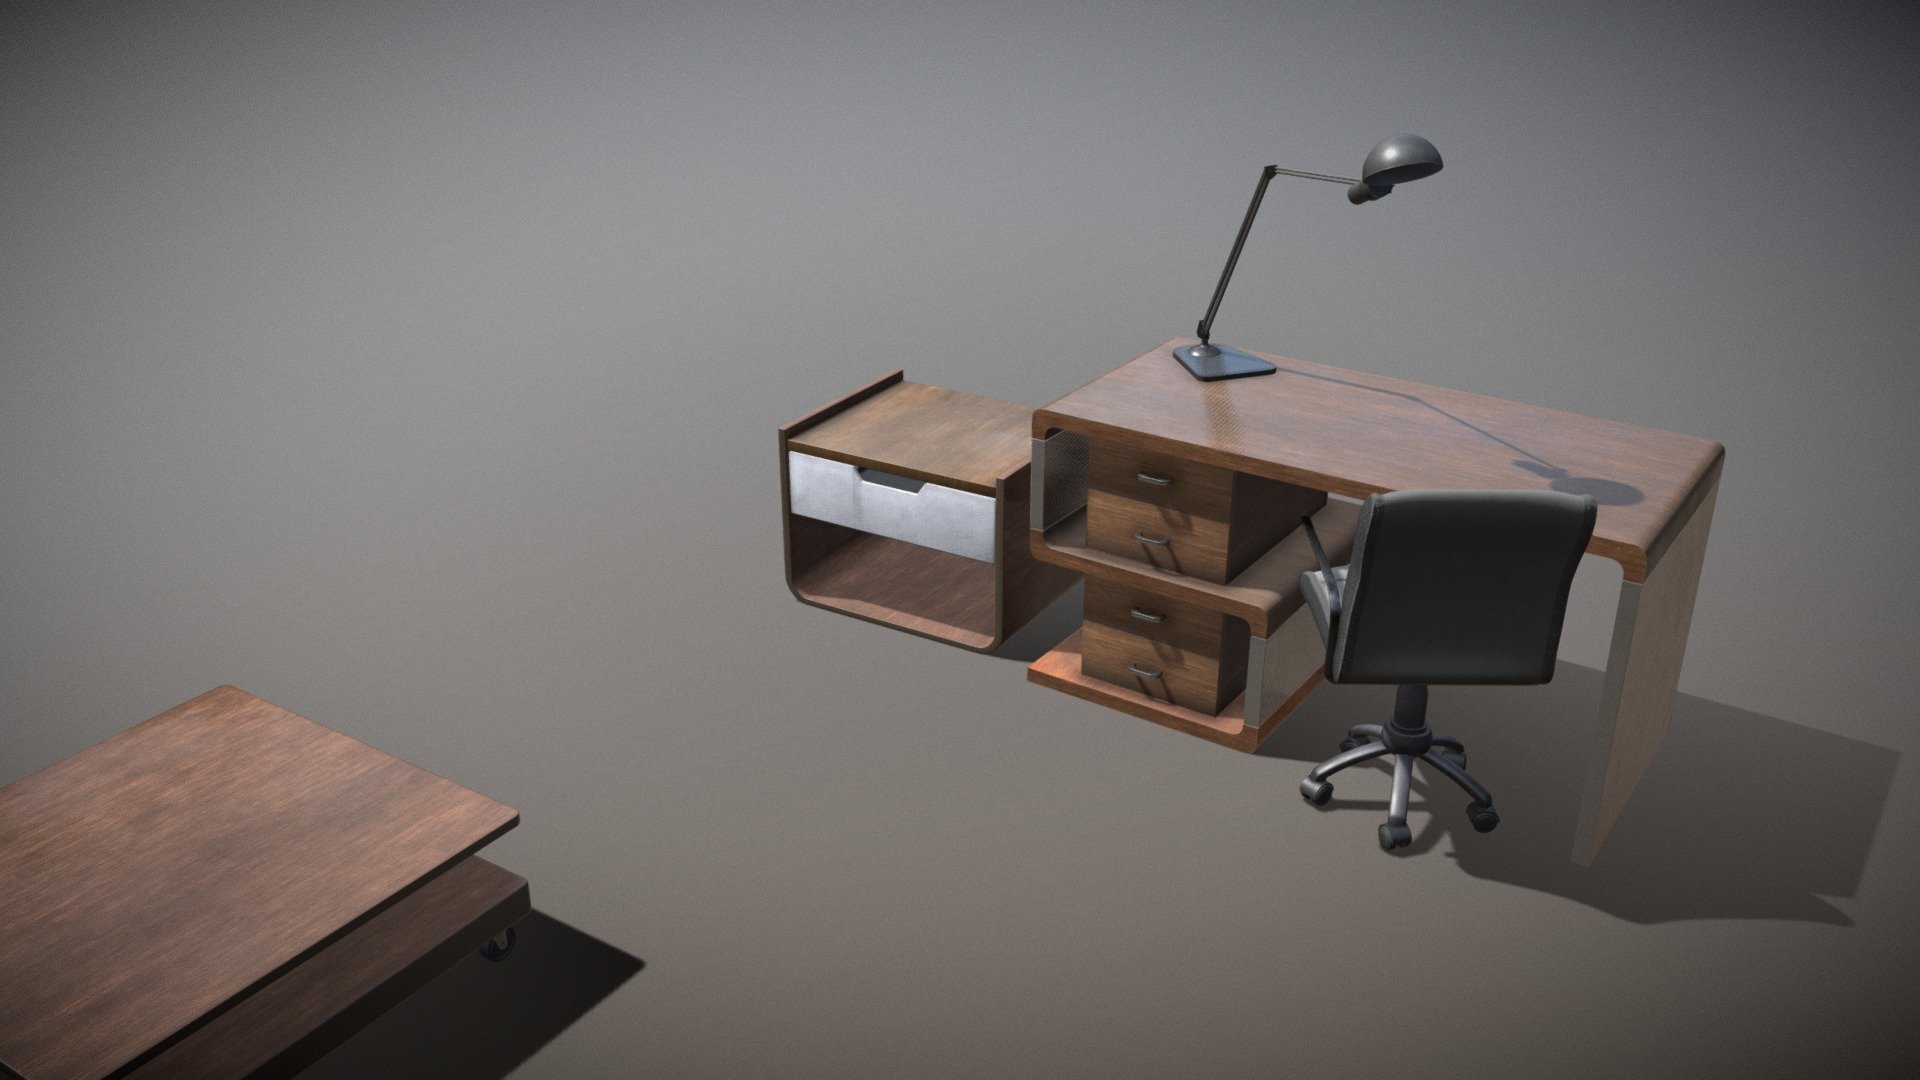 3D mid-poly models of 5 Office Interior Assets

Part of my Interior Assets Vol.1

Pack includes:

• Office chair

• Desk

• Desk lamp

• Stand for documents

• Moveable coffee table

Models contains 5 own materials for each of object with PBR 2-4K textures sets. Mid-poly count guarantees quality. 

FBX format files attached in the archive.

Feel free to ask smth or request other file format 3d model